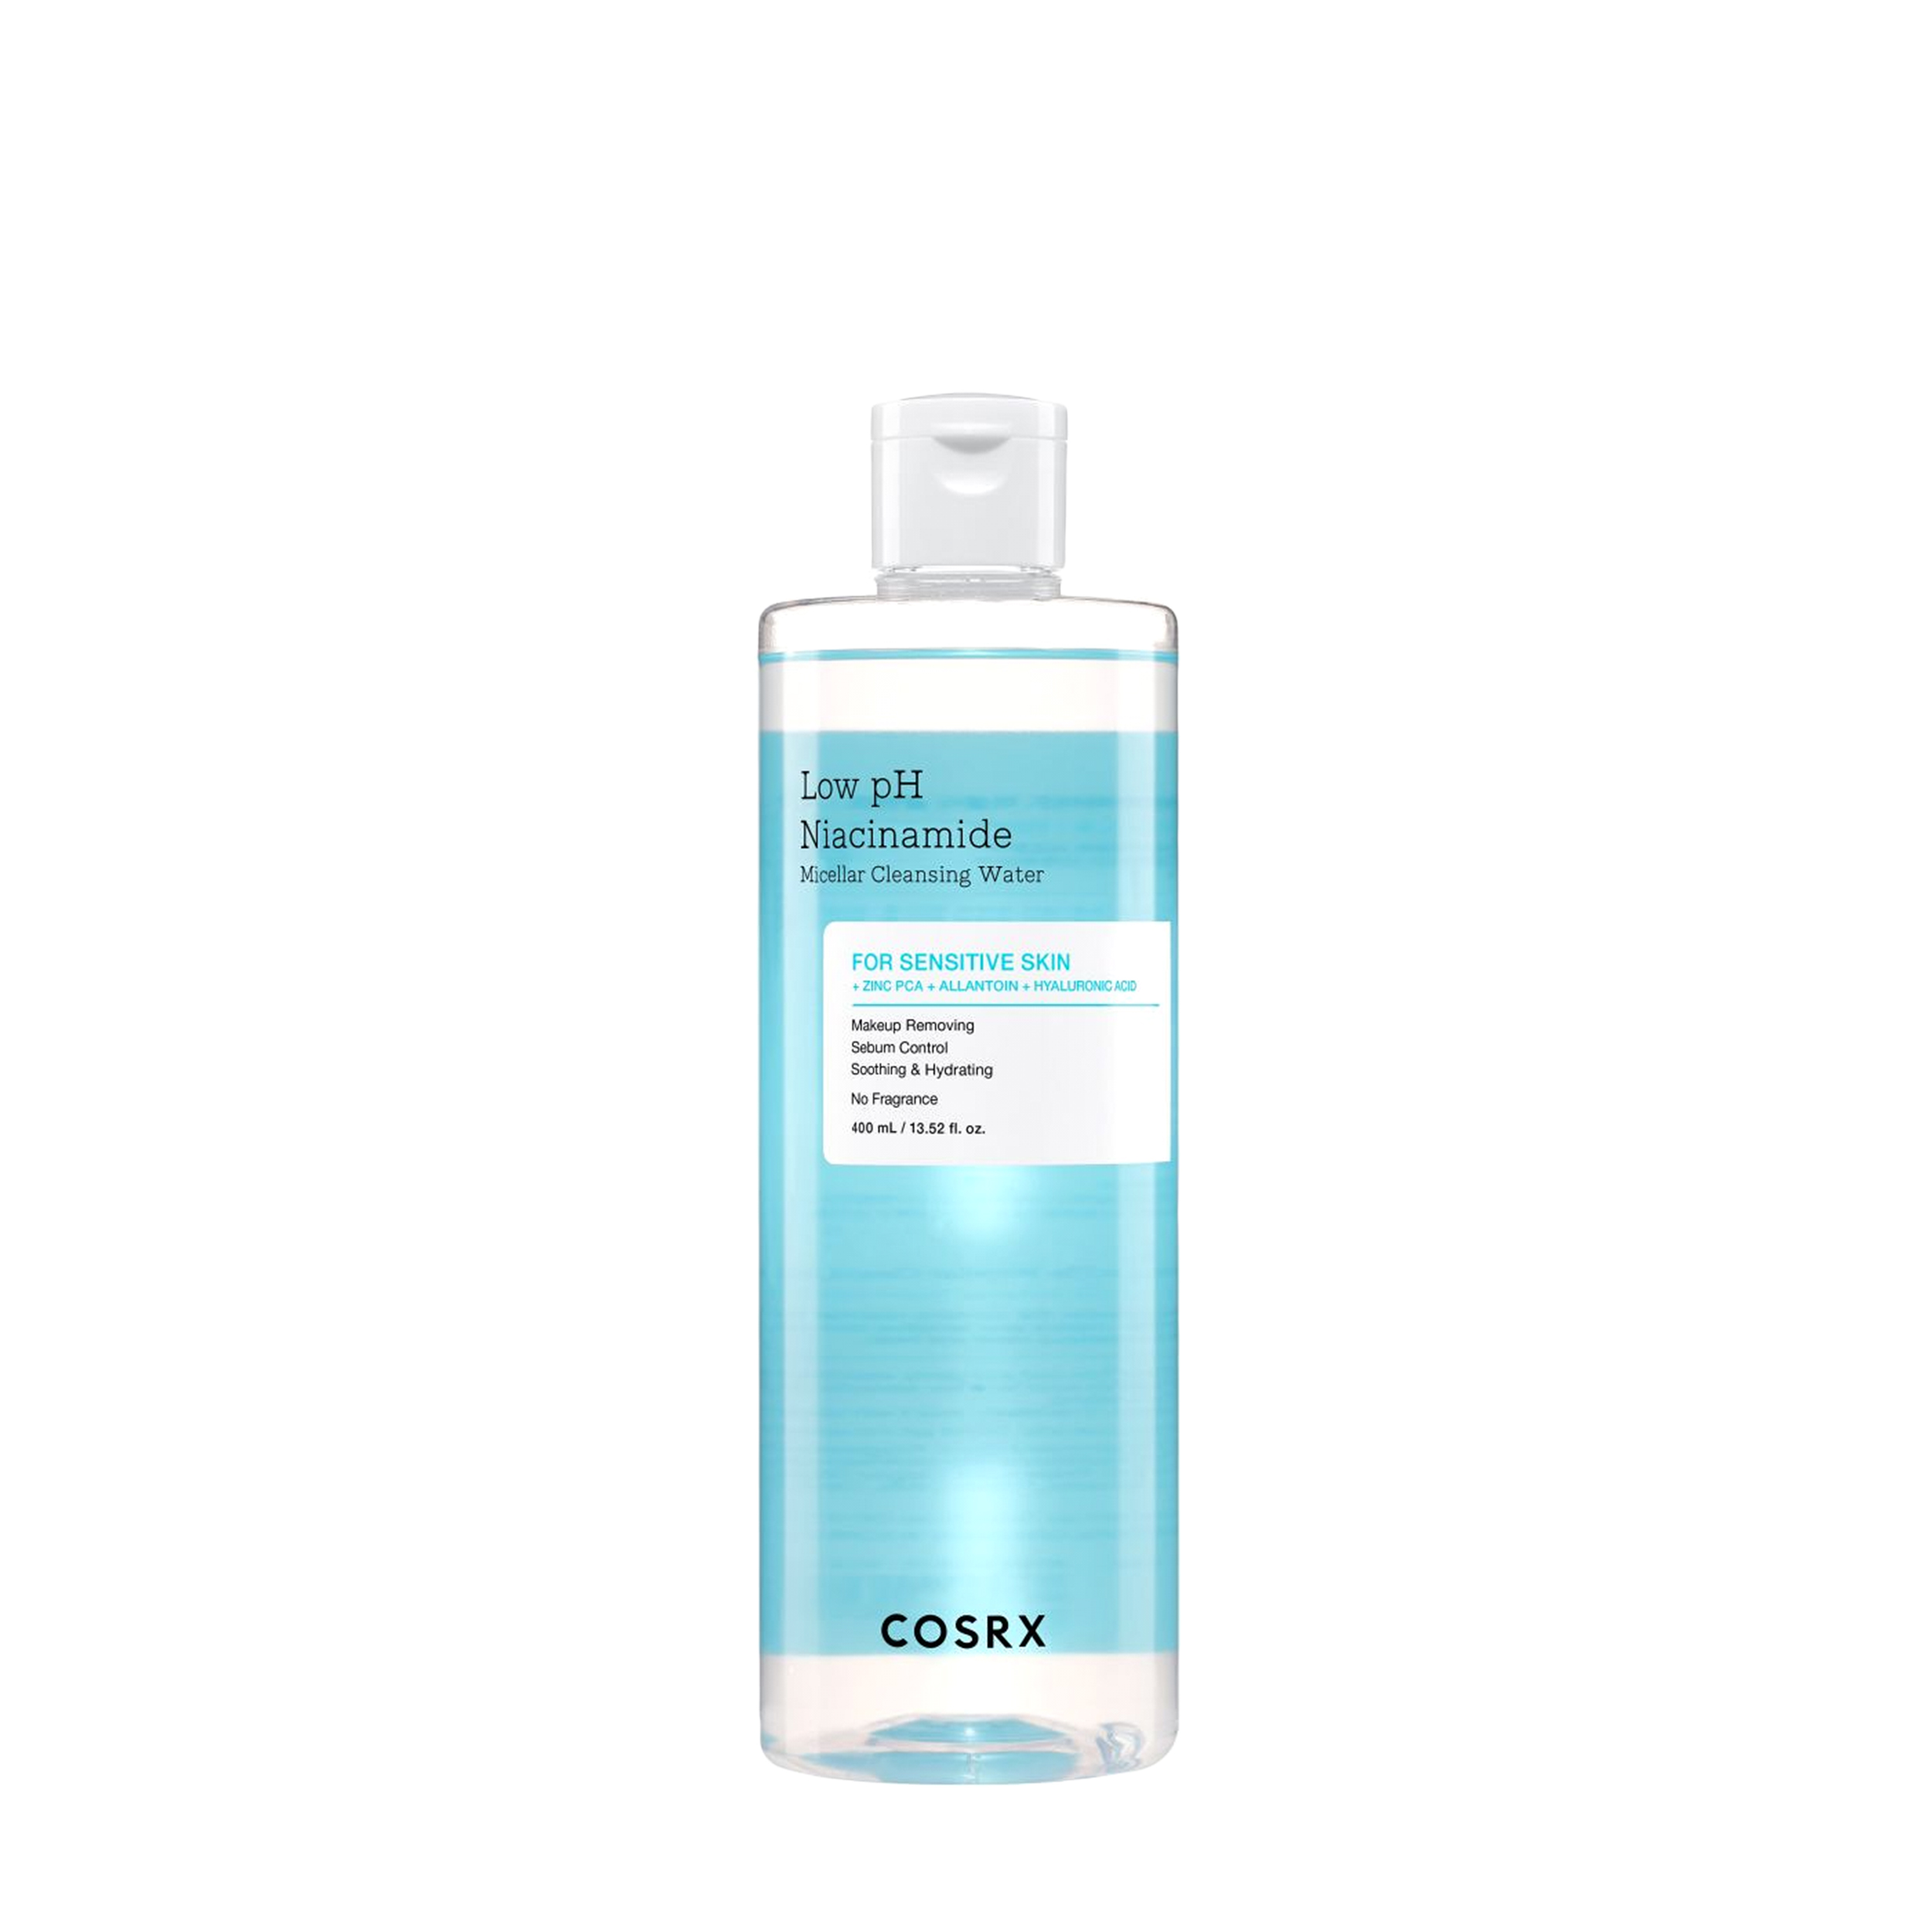 COSRX COSRX Low pH Niacinamide Micellar Cleansing Water 400 мл